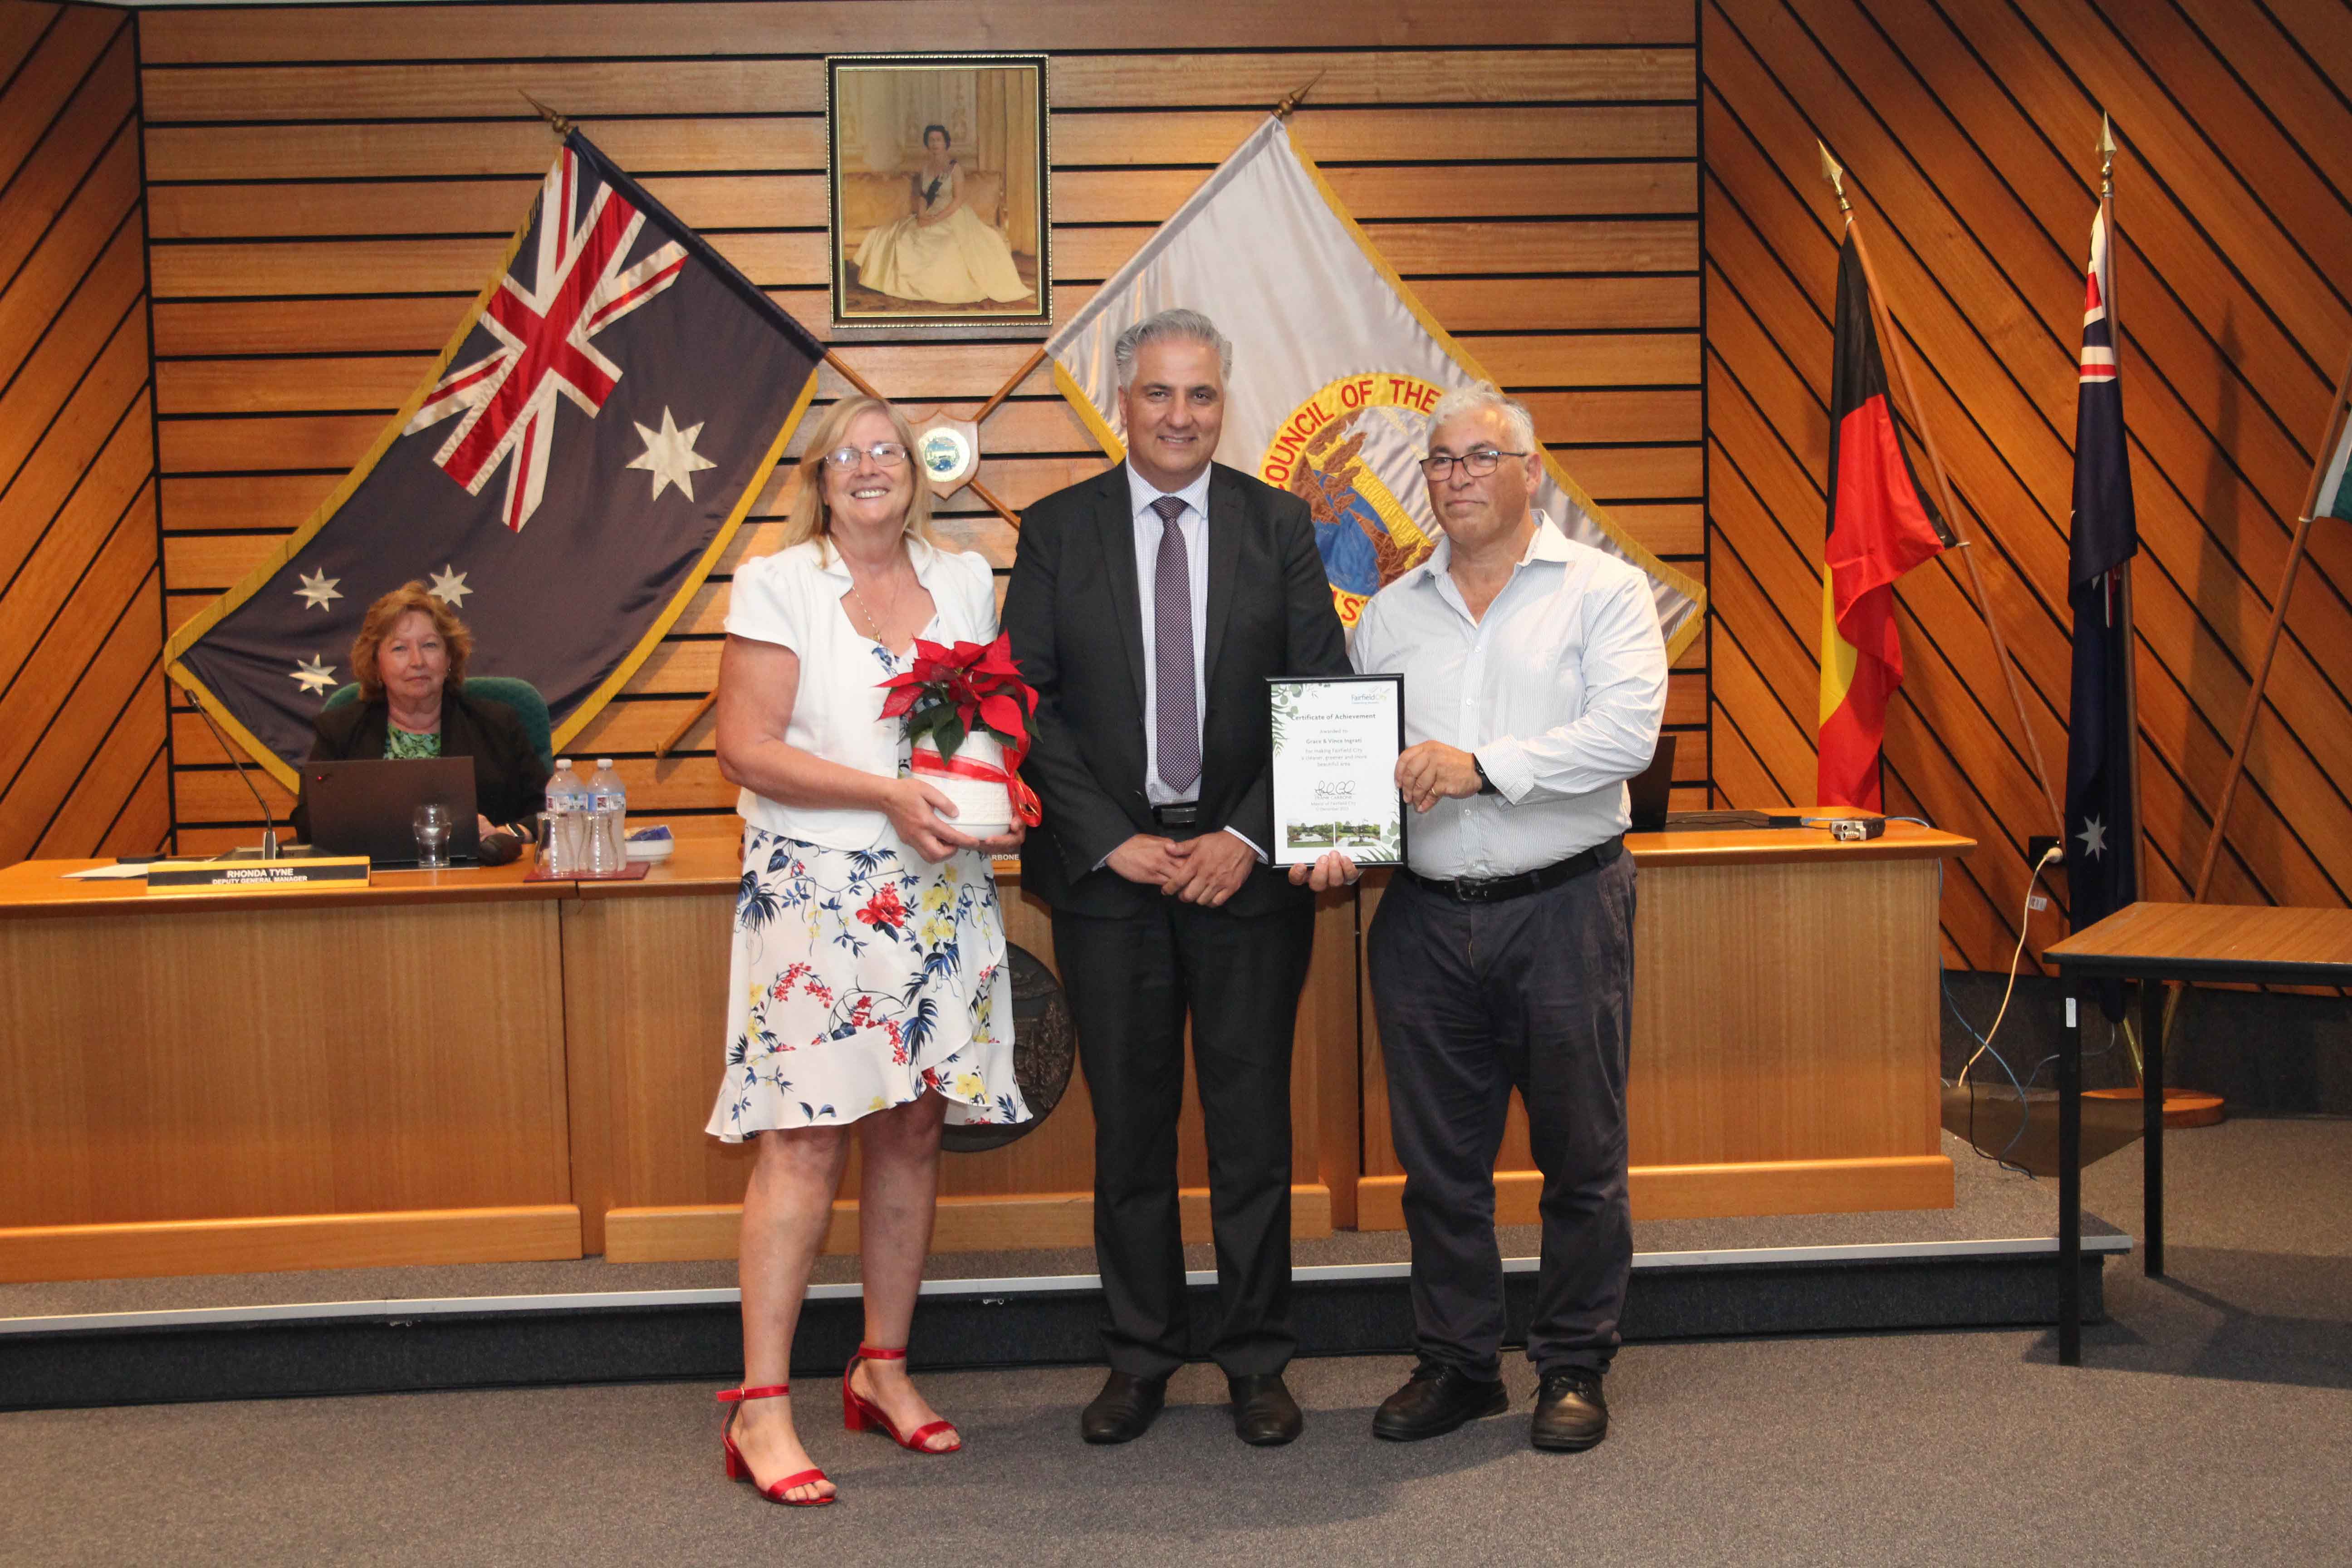 2023 Garden of the Year Winners, Grace and Vince Ingrati with Mayor Frank Carbone